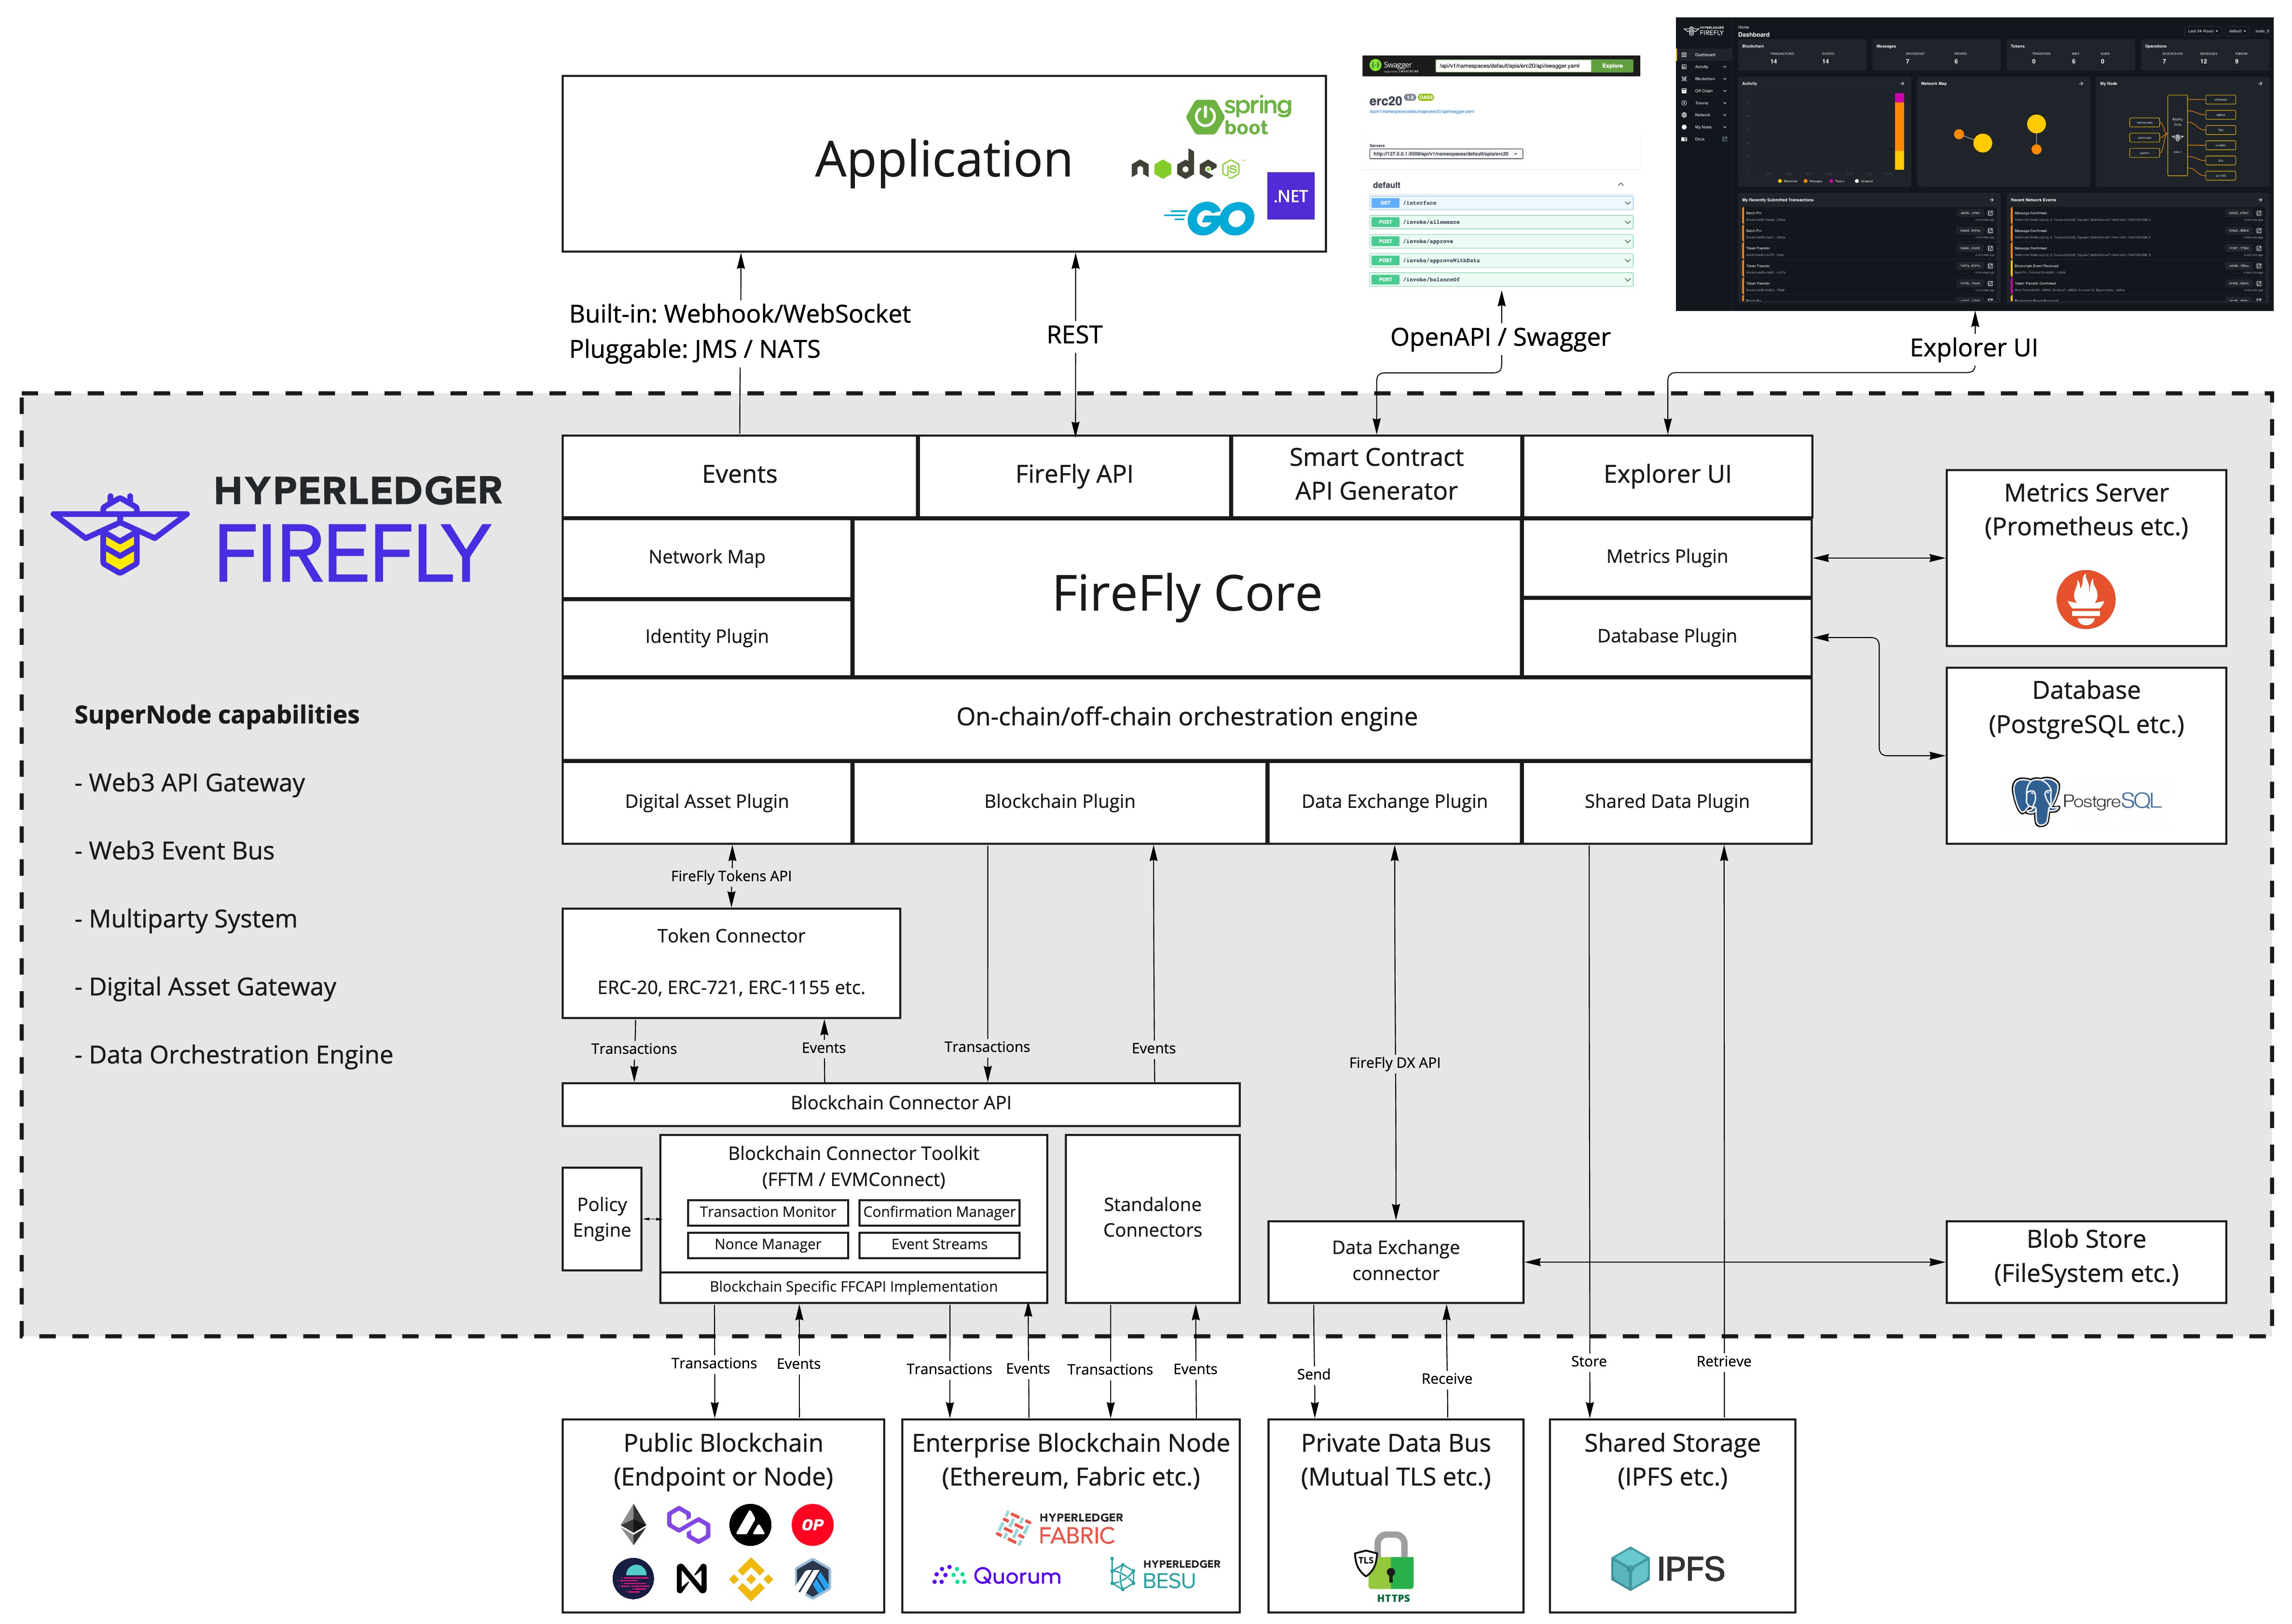 FireFly Architecture Overview